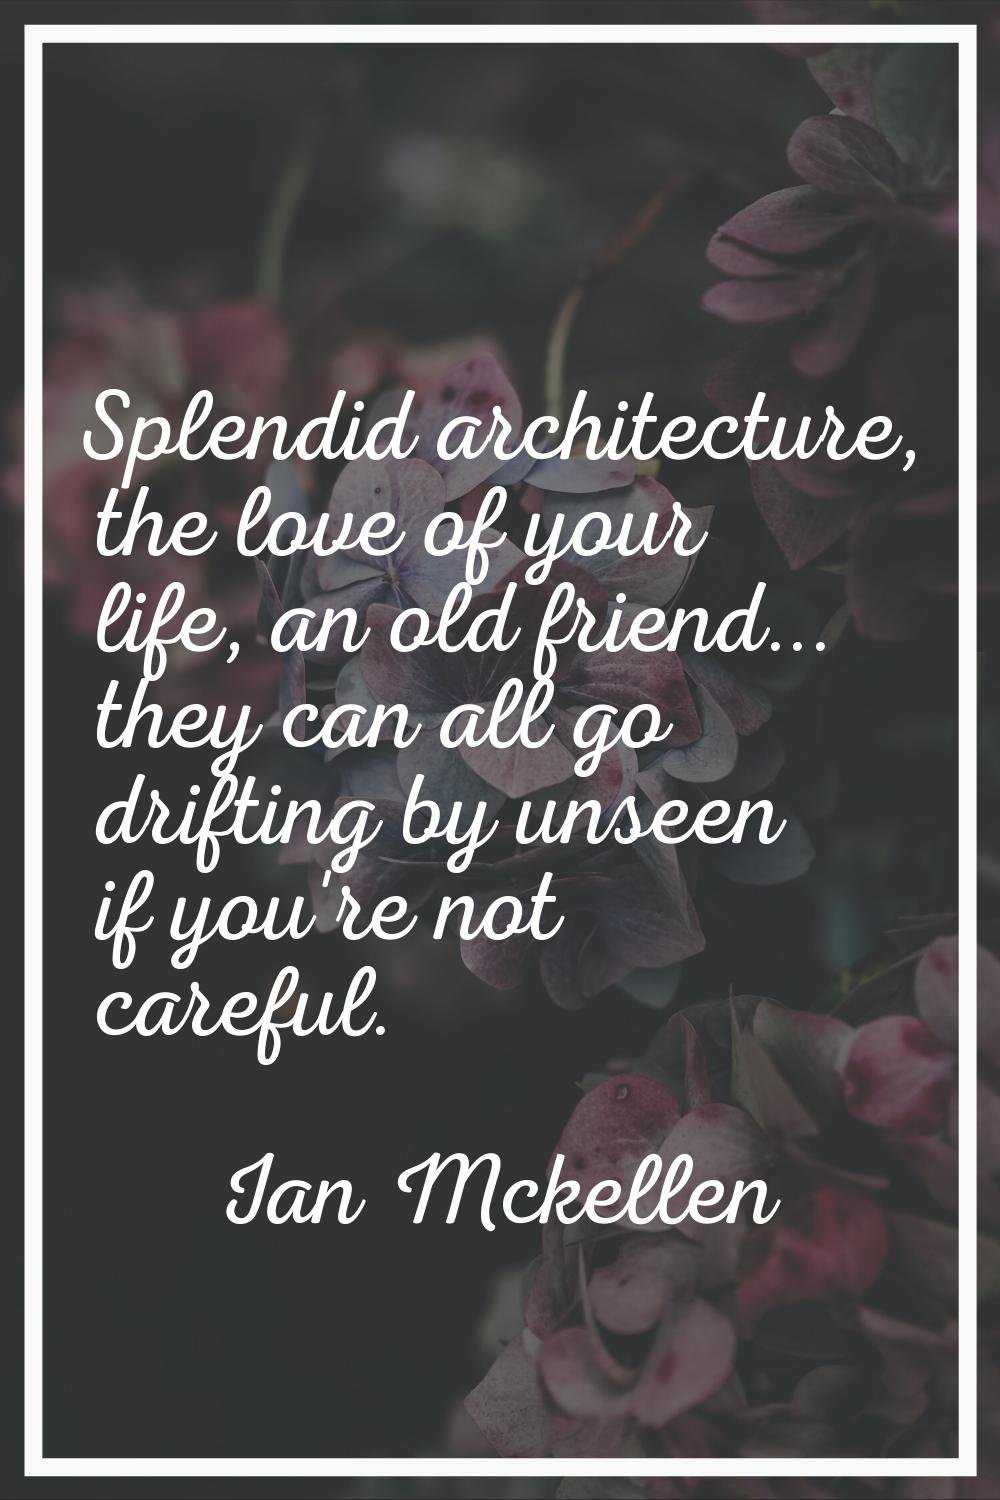 Splendid architecture, the love of your life, an old friend... they can all go drifting by unseen i